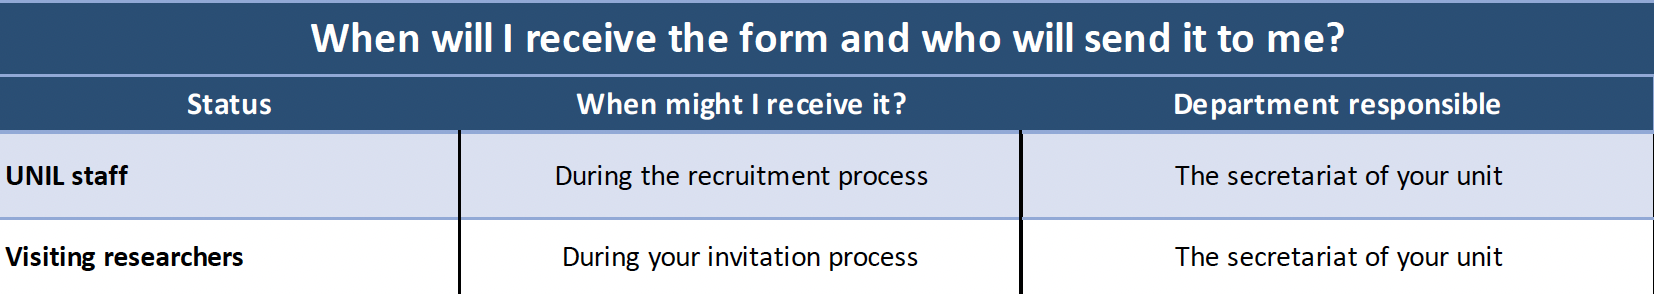 reservation_process.png